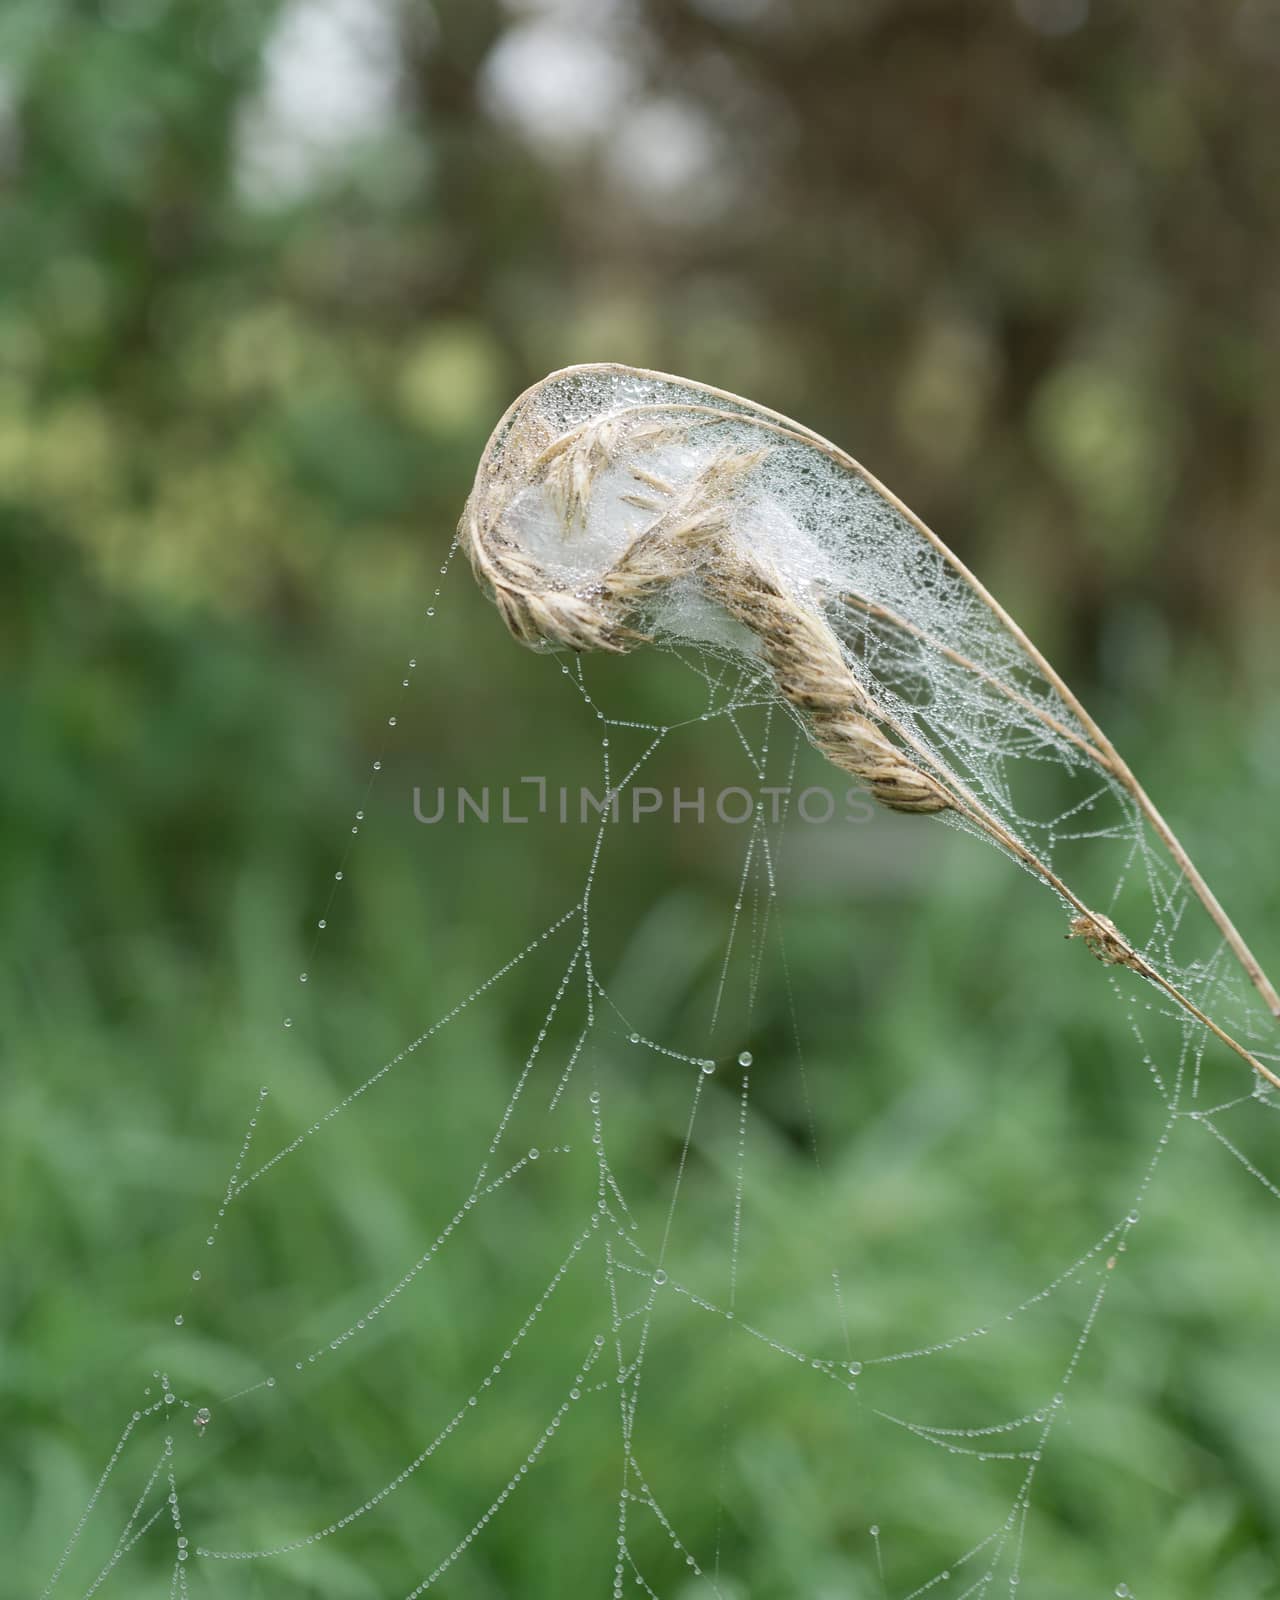 Messy web on blade of grass by frankhoekzema